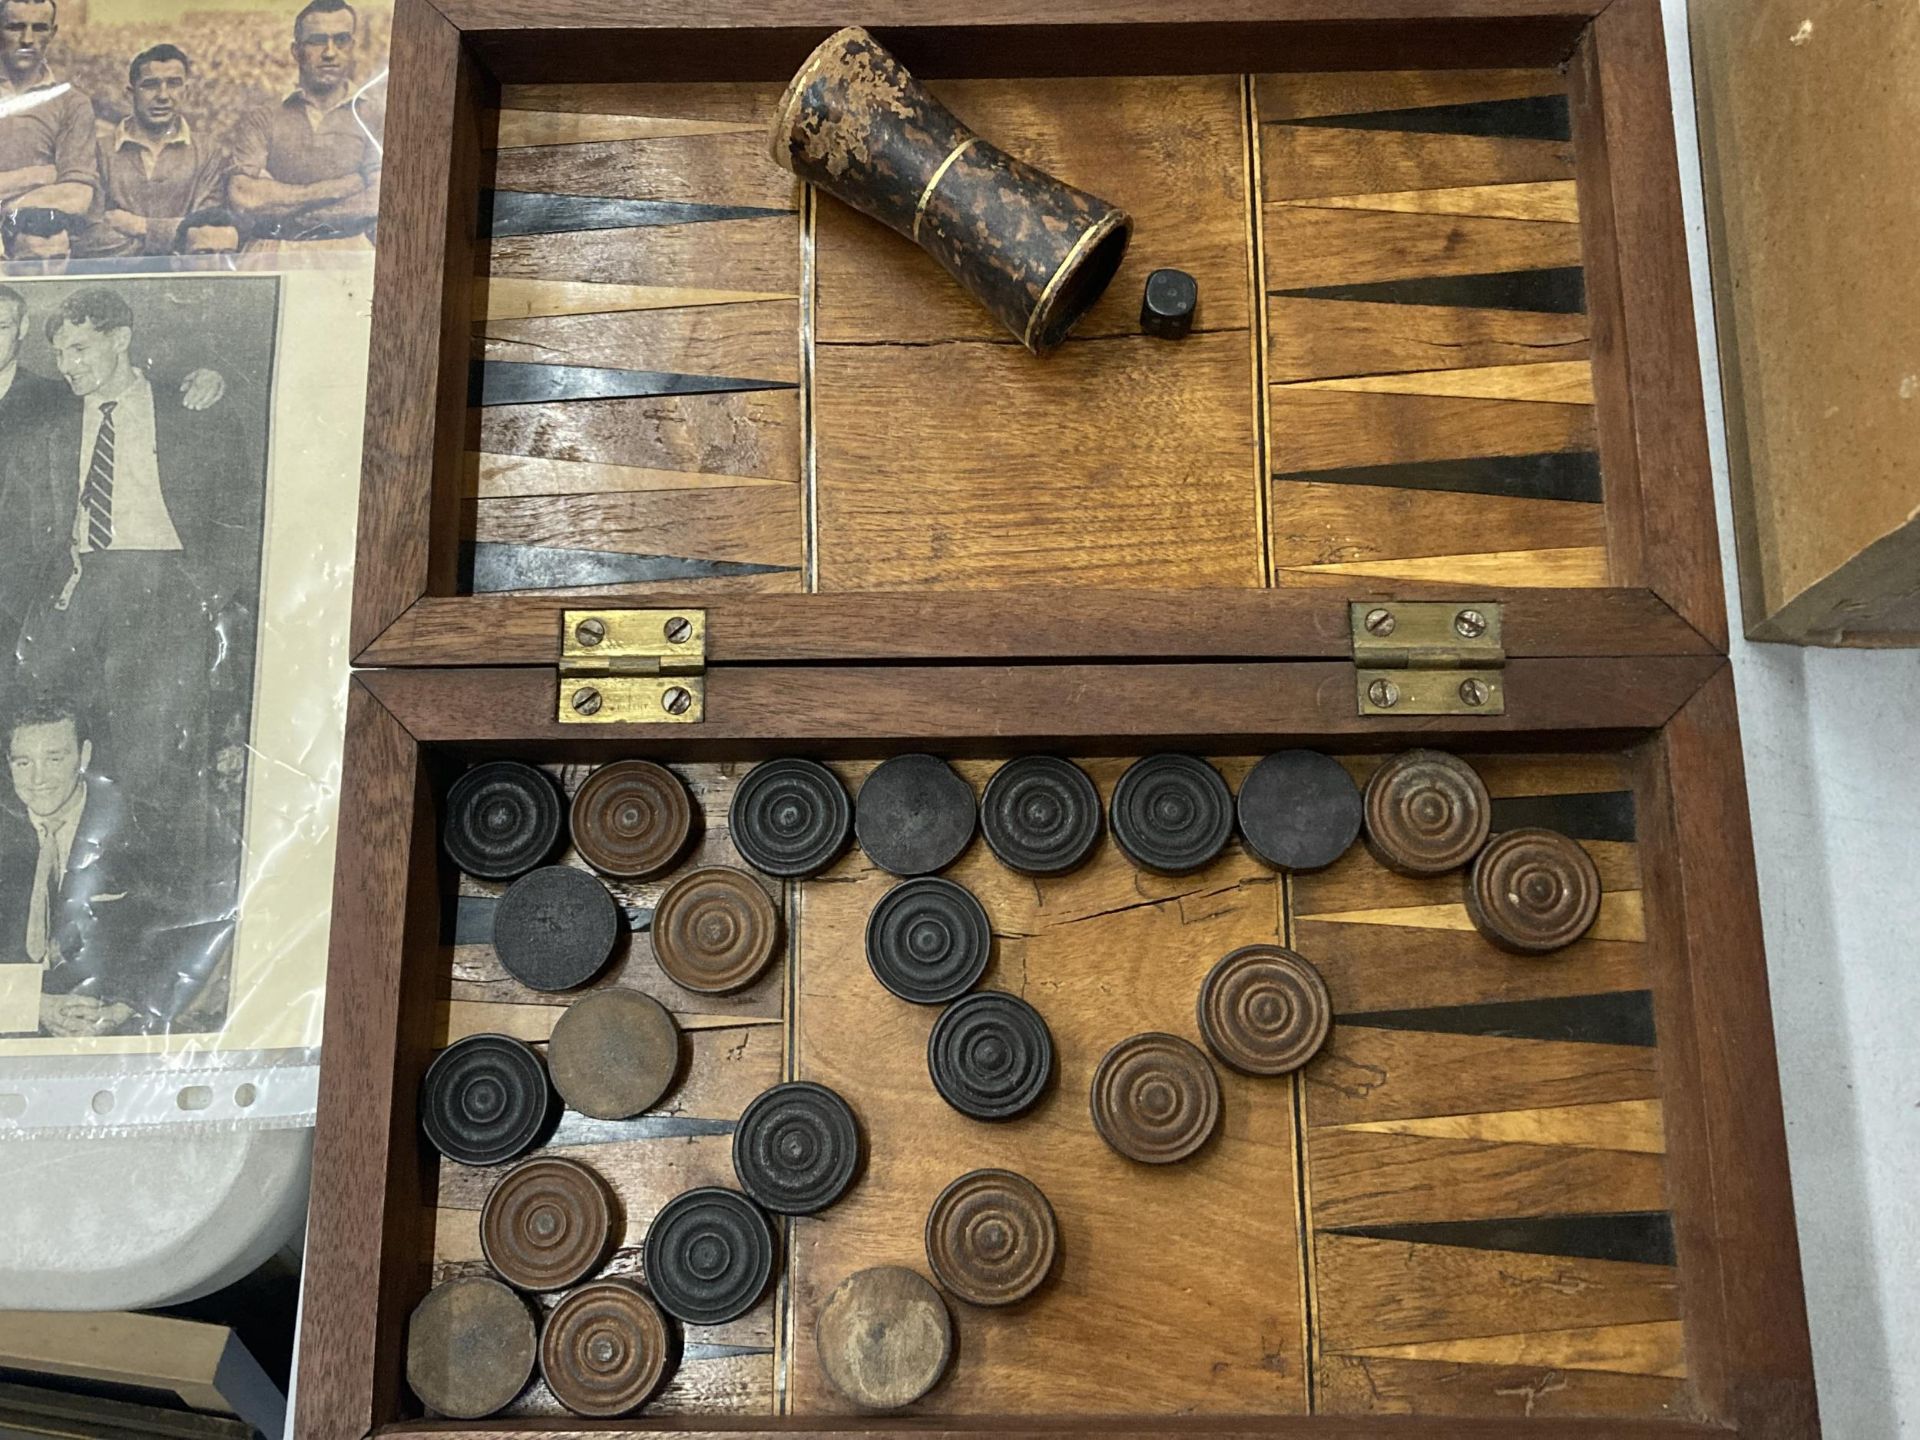 A FOLDING CHESS/BACKGAMMON BOX WITH COUNTERS, DICE AND SHAKER - Image 2 of 6